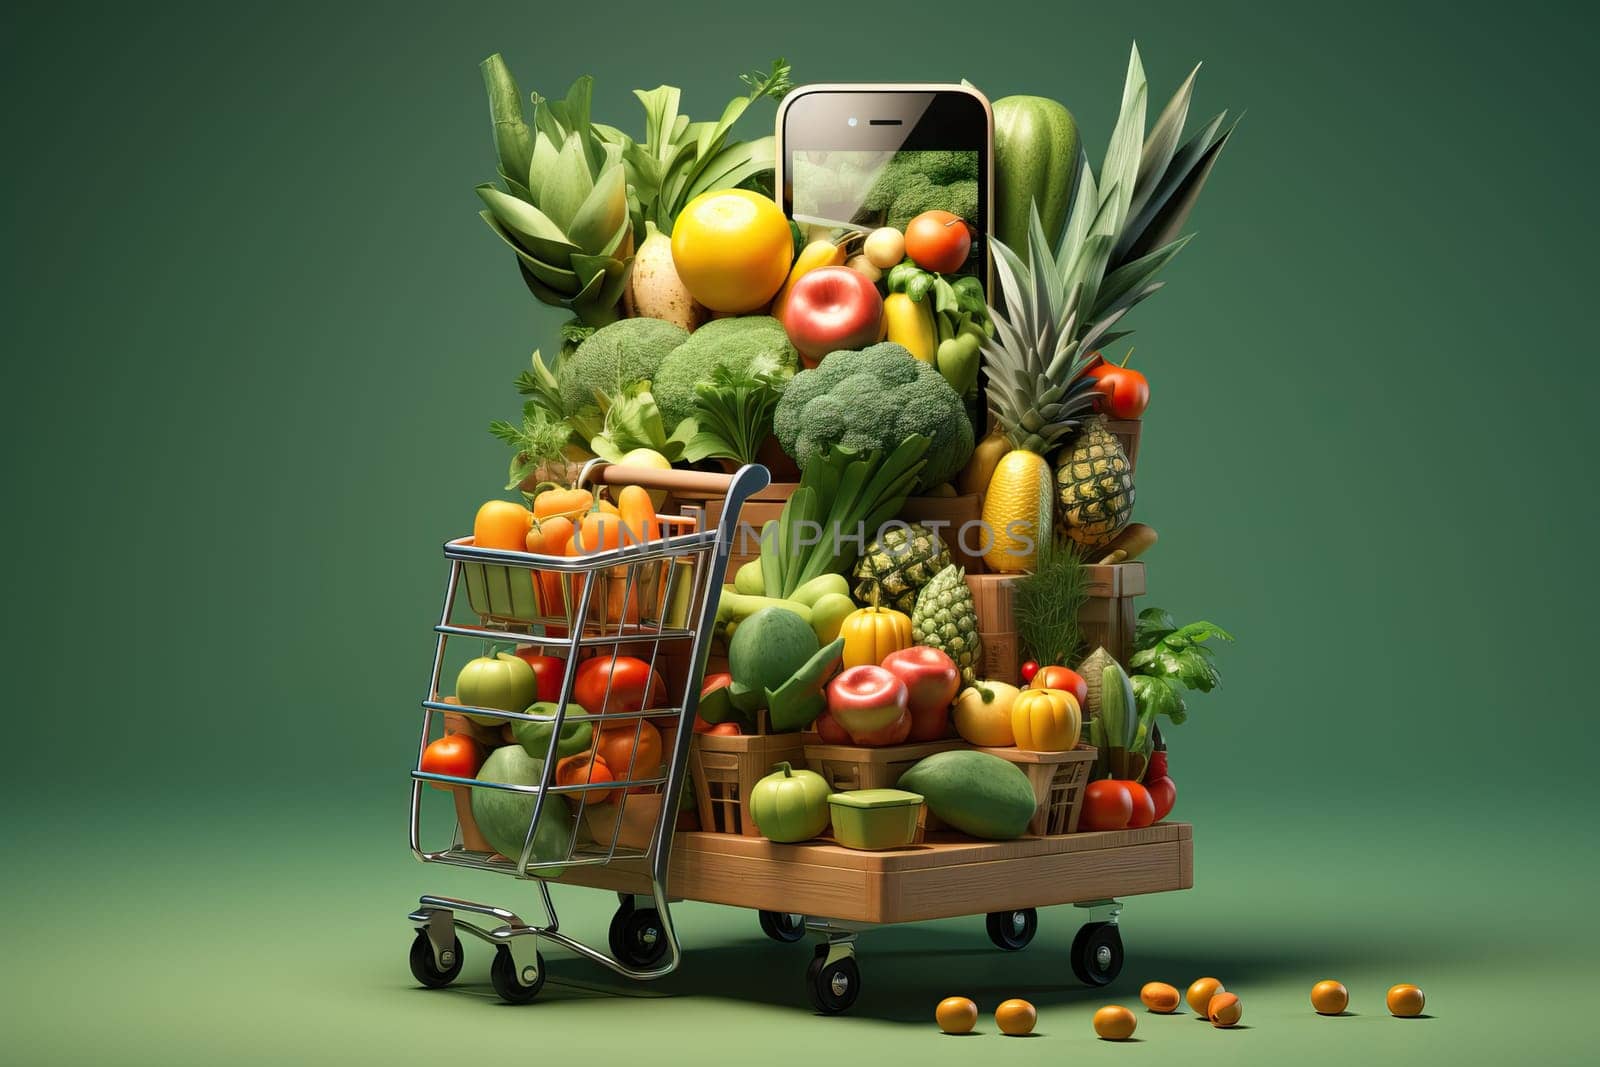 Online food ordering concept, mobile food ordering app, food using mobile apps. Abstract illustration of shopping in a supermarket. Many vegetables on a stand with shelves on a green studio background.